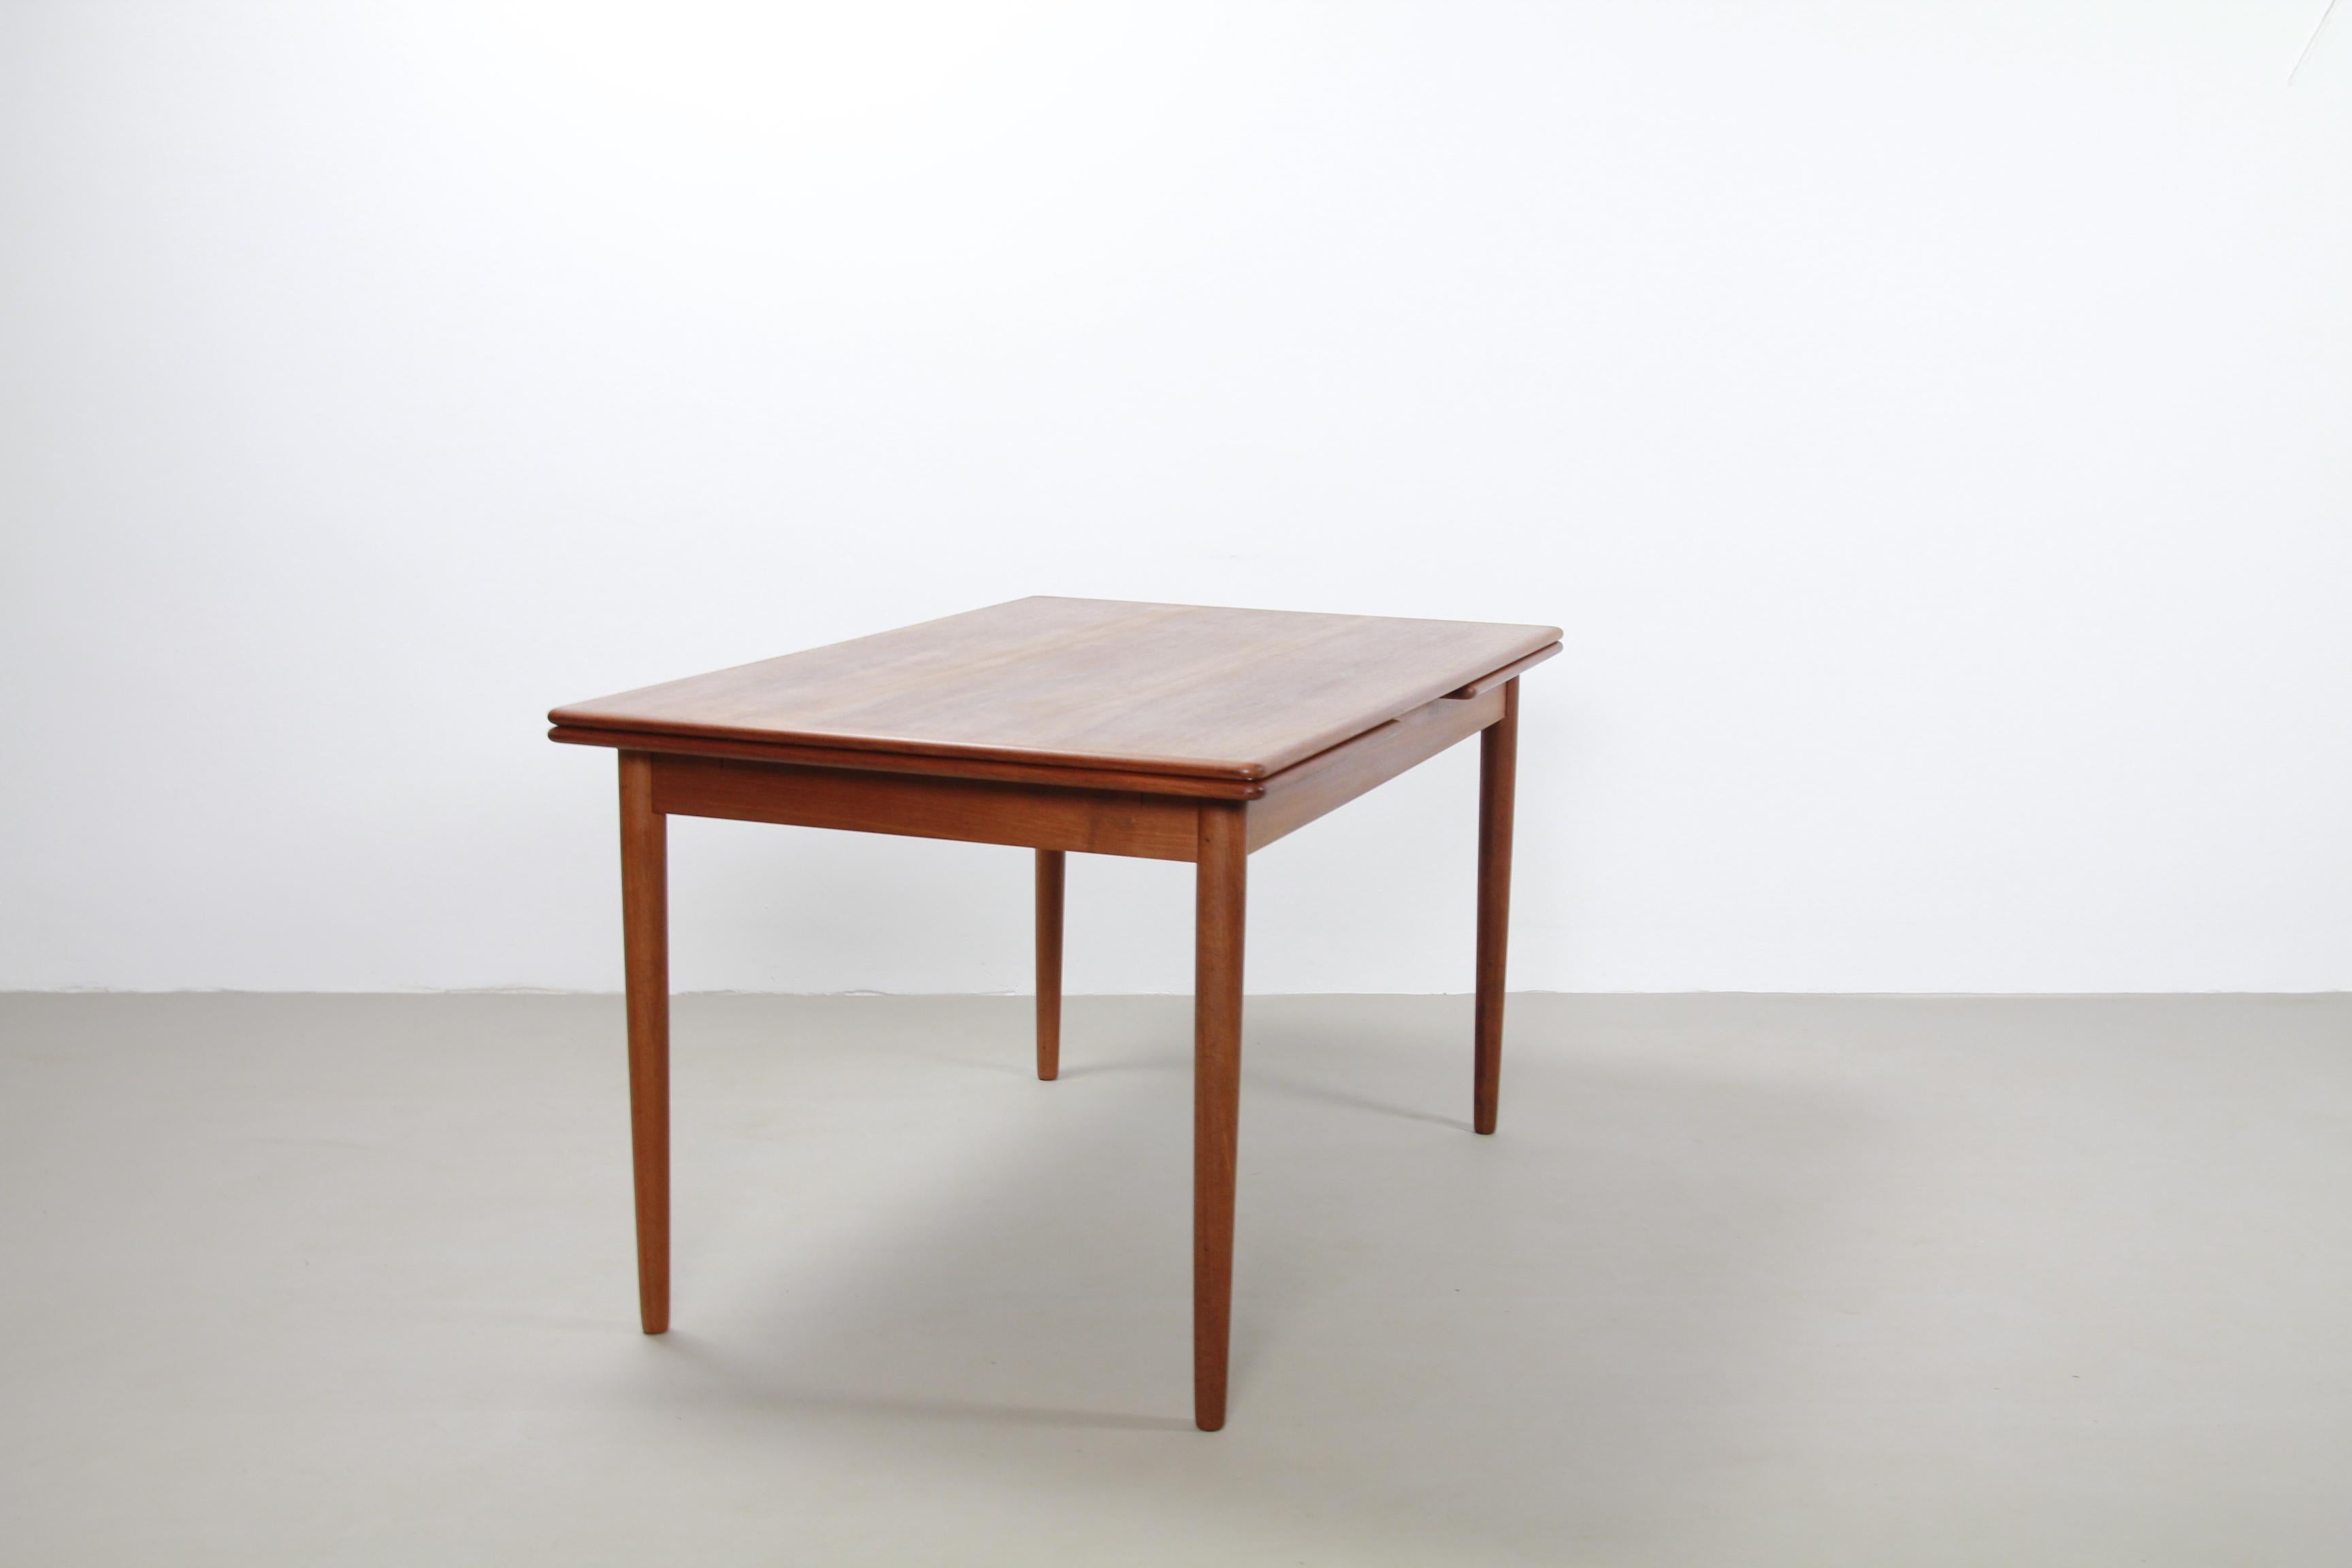 20th Century Danish Extendable Design Dining Table in Teak with 2 Extensions by Møller, 1960s